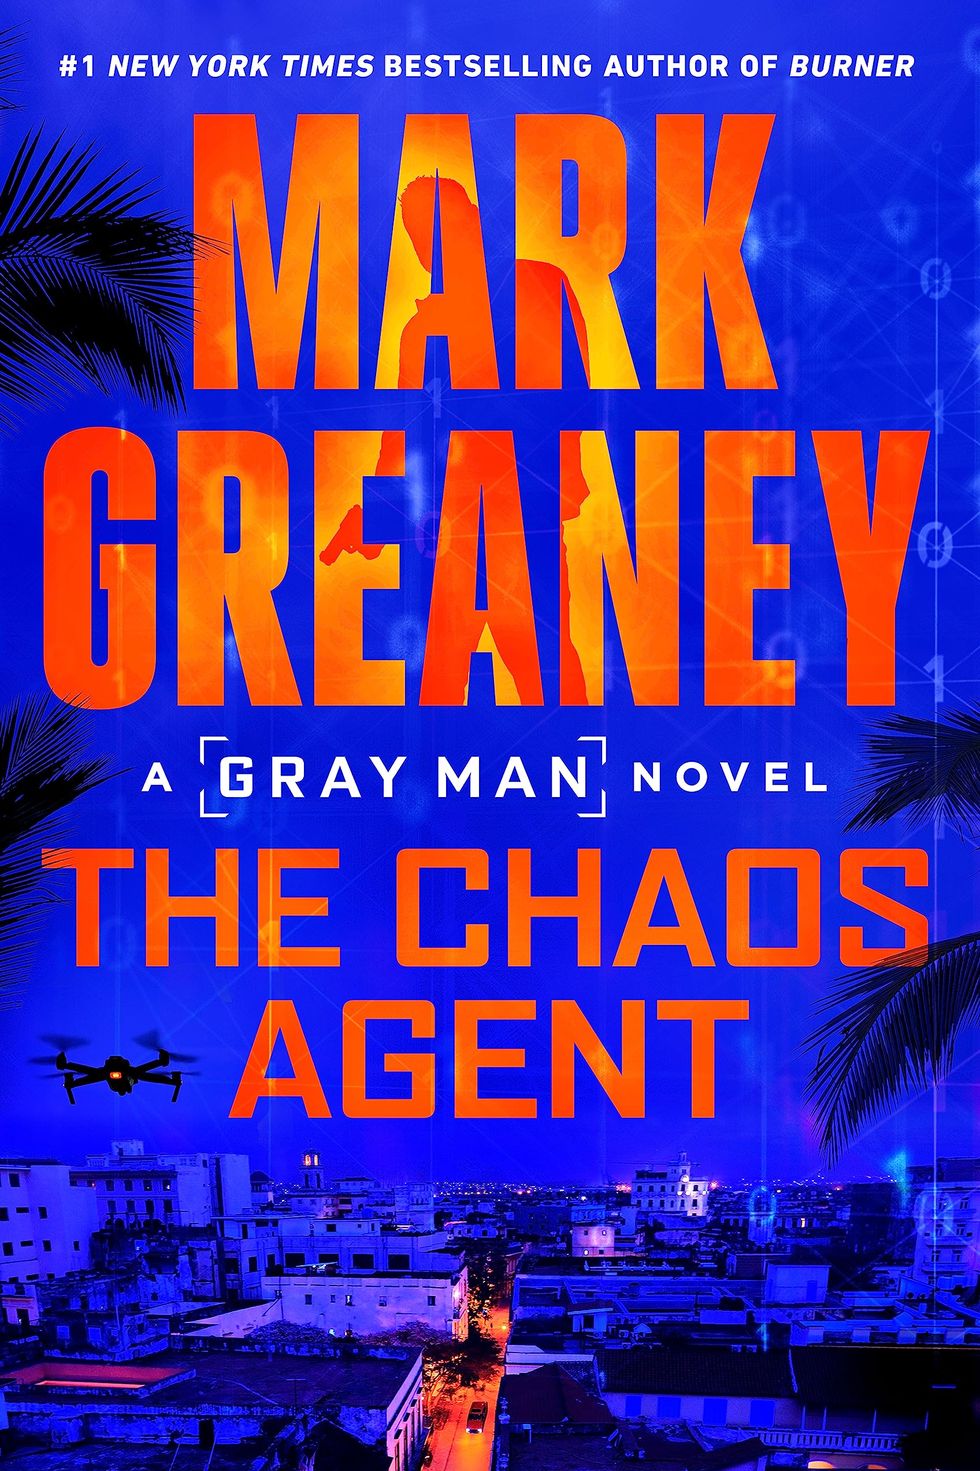 The Chaos Agent (Gray Man Book 13)